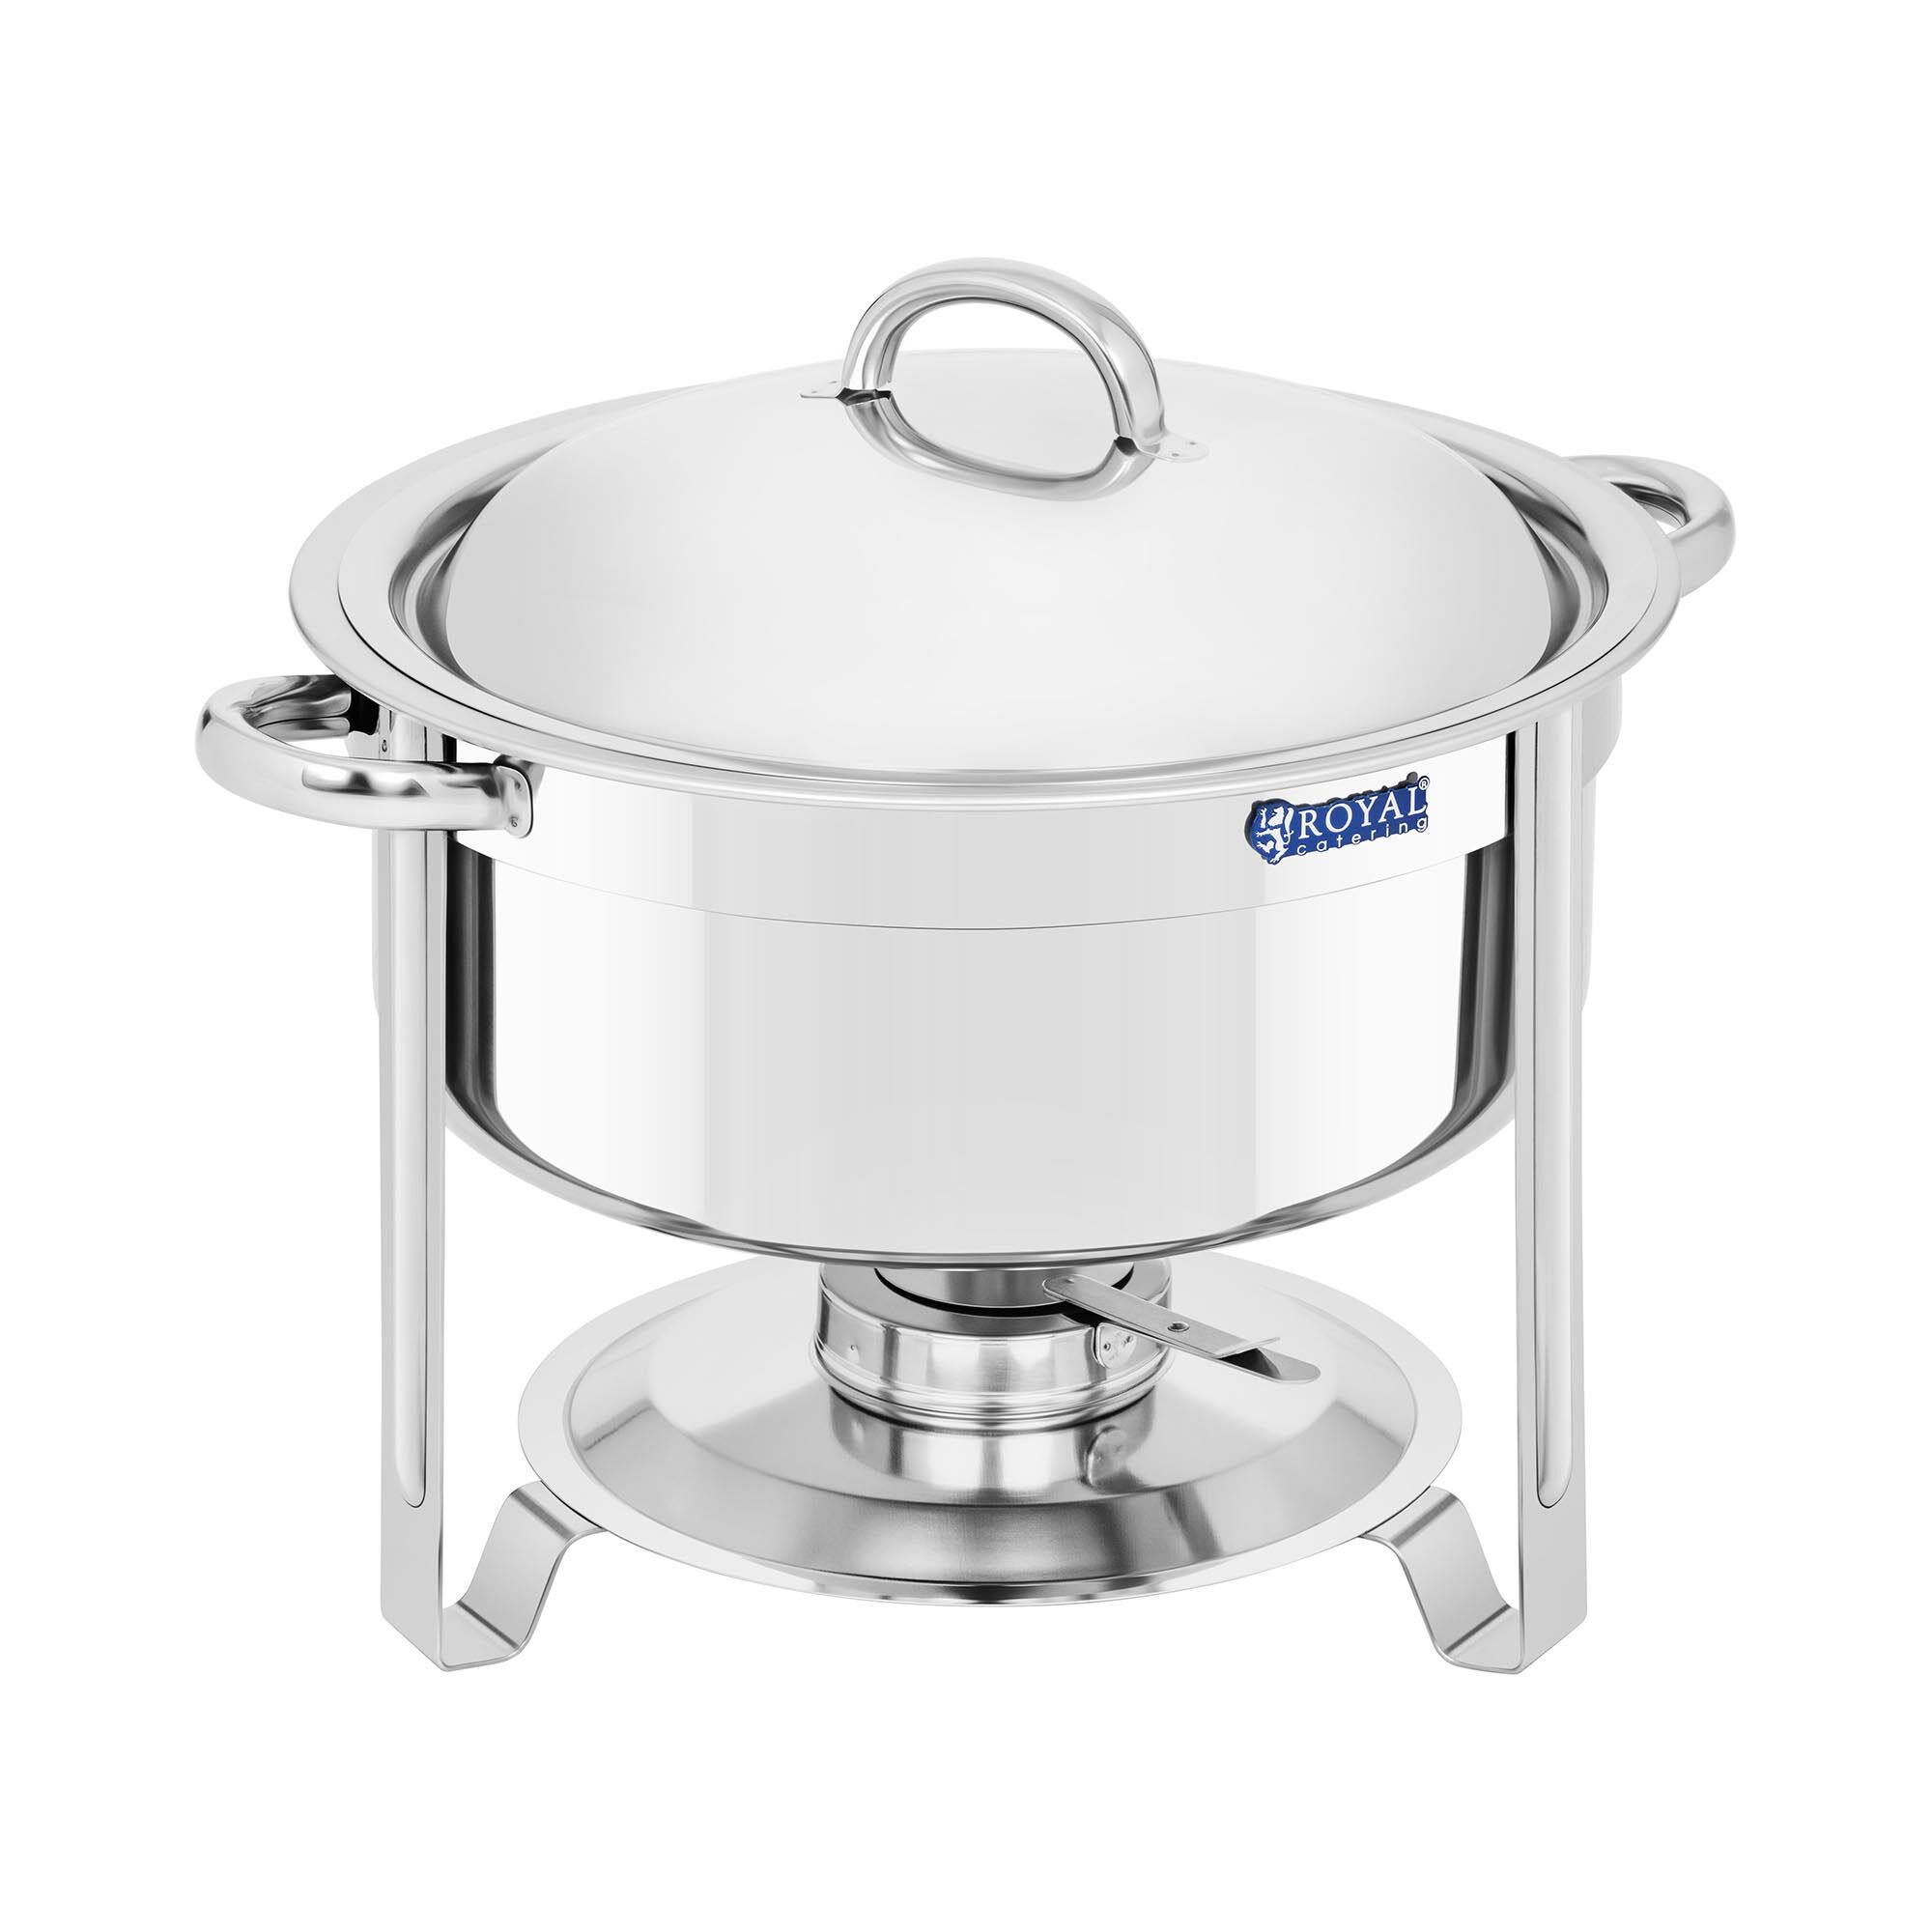 Royal Catering Chafing Dish - rond - 7.6 L 10011434